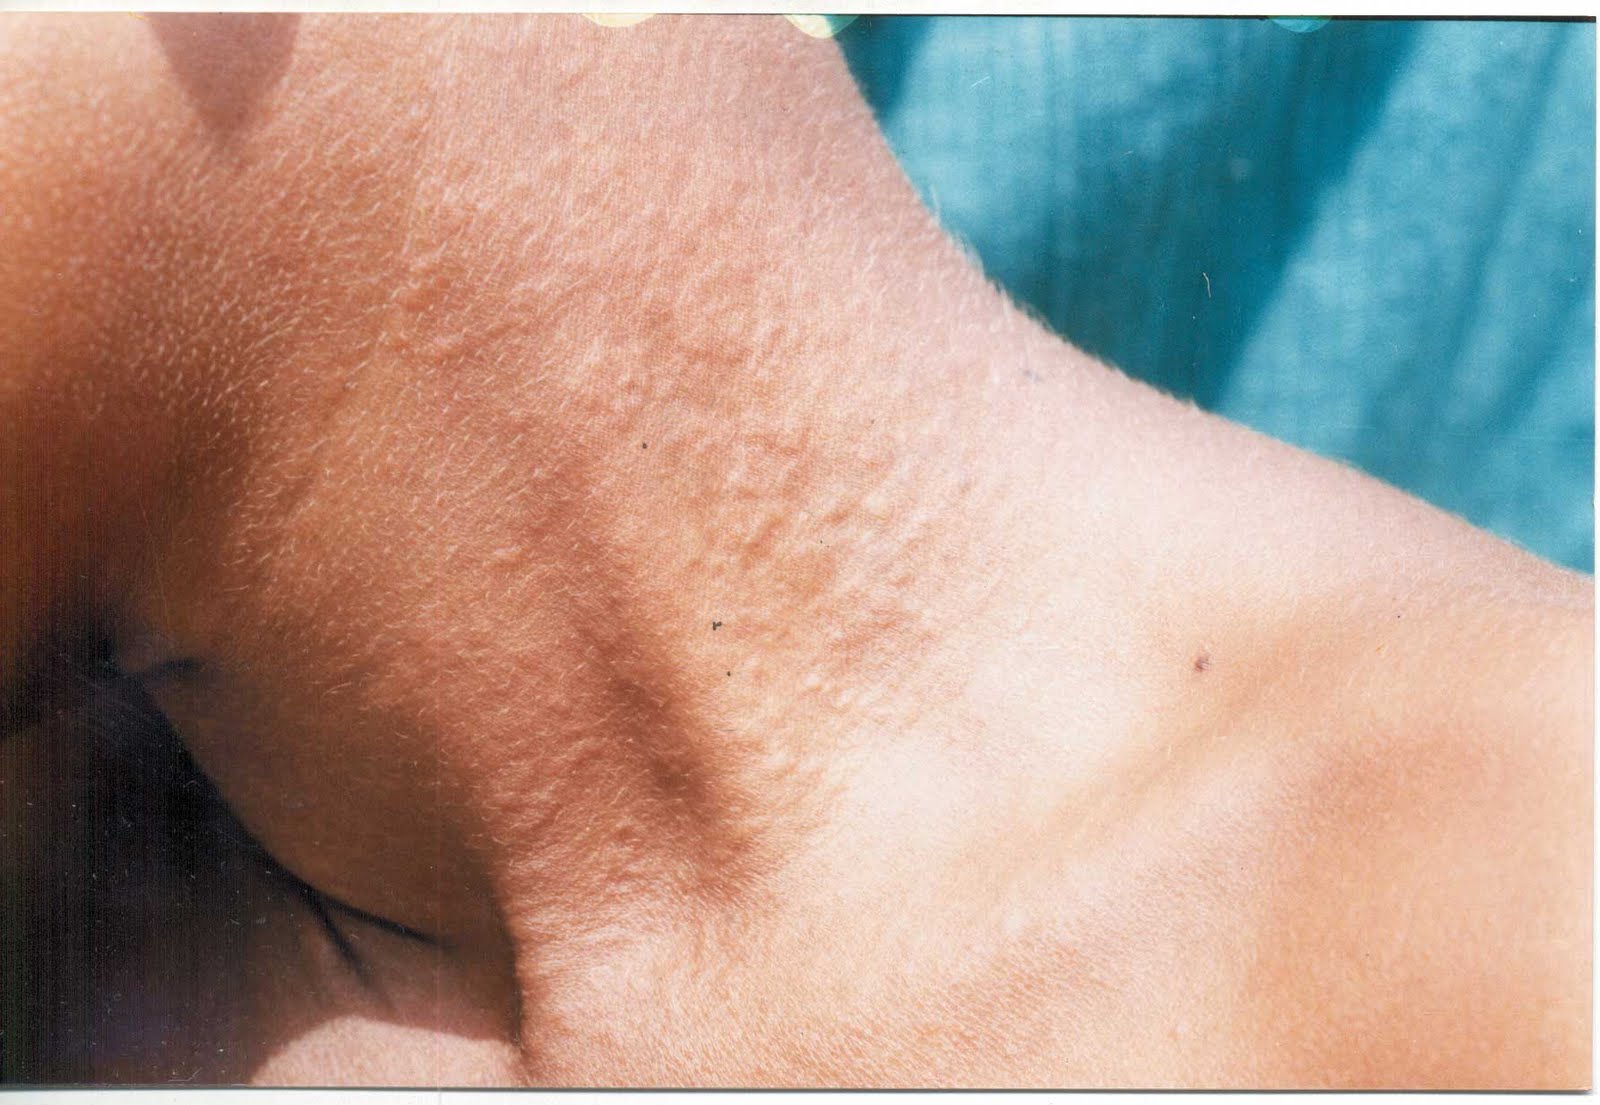 Genetic Skin Conditions